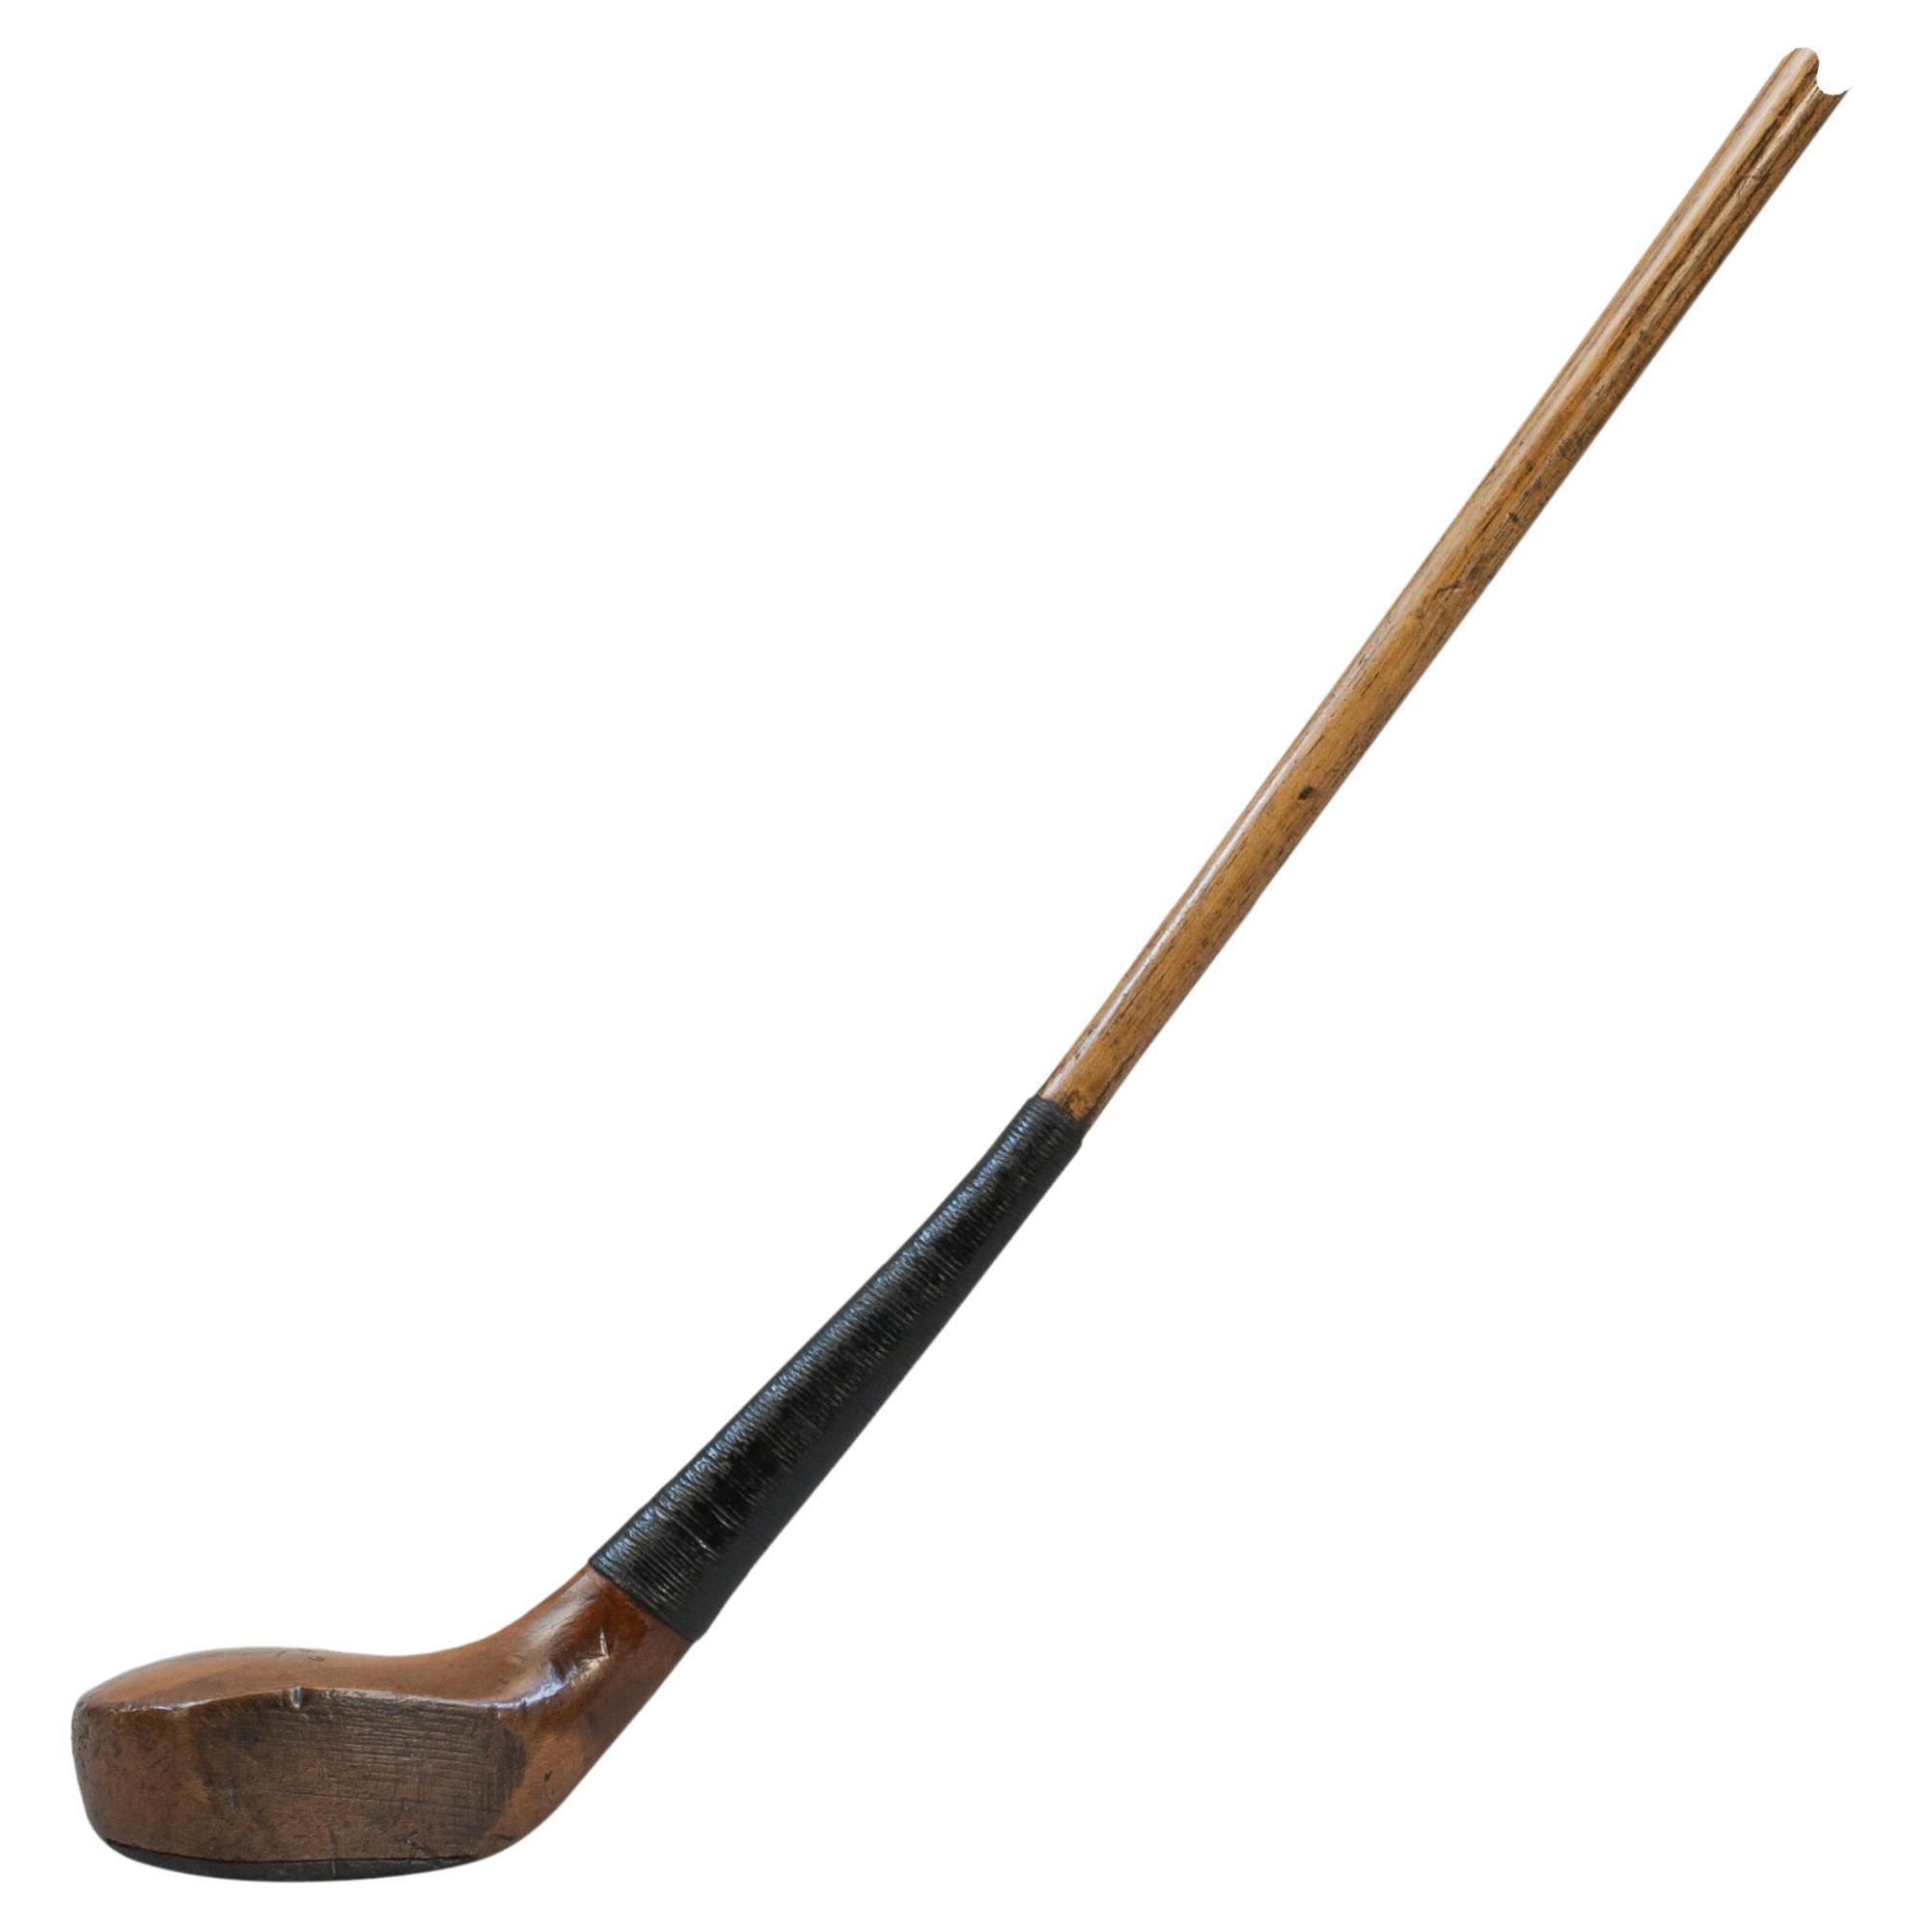 A Persimmon Wood Golf Club, Driver With Scared Head. For Sale